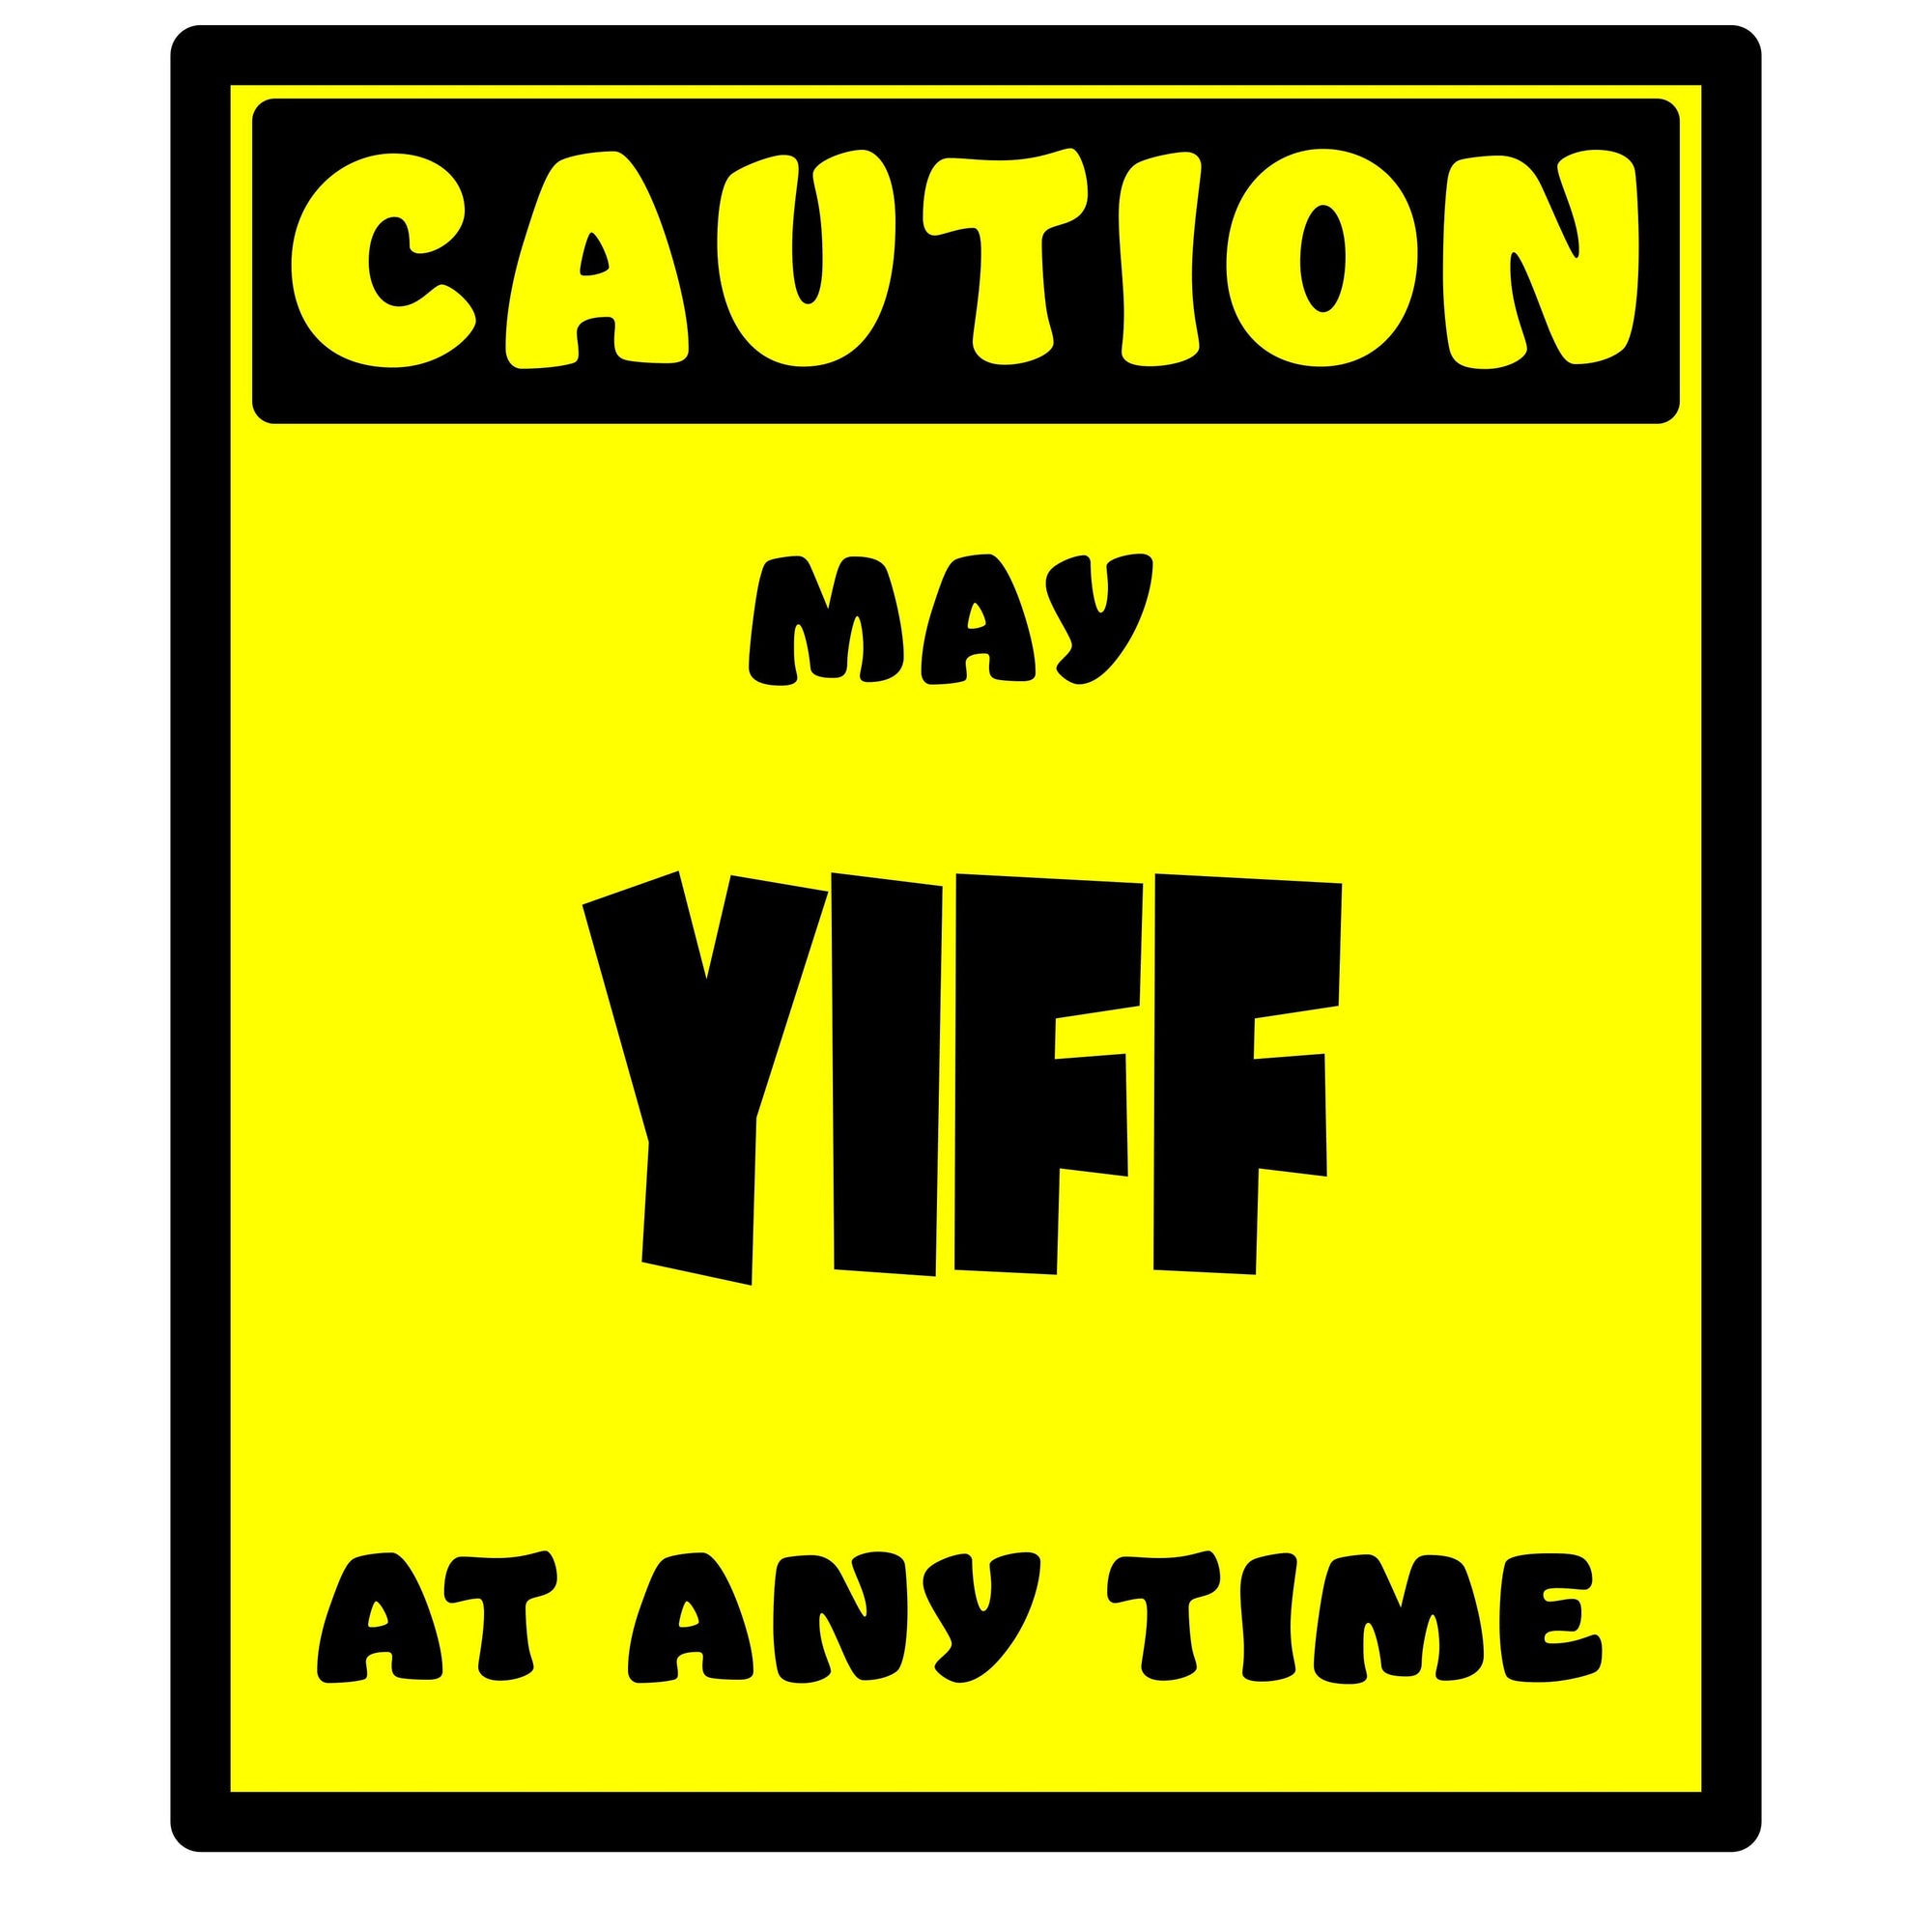 Whootorca - Caution! Series - CAUTION! May YIFF at any time!